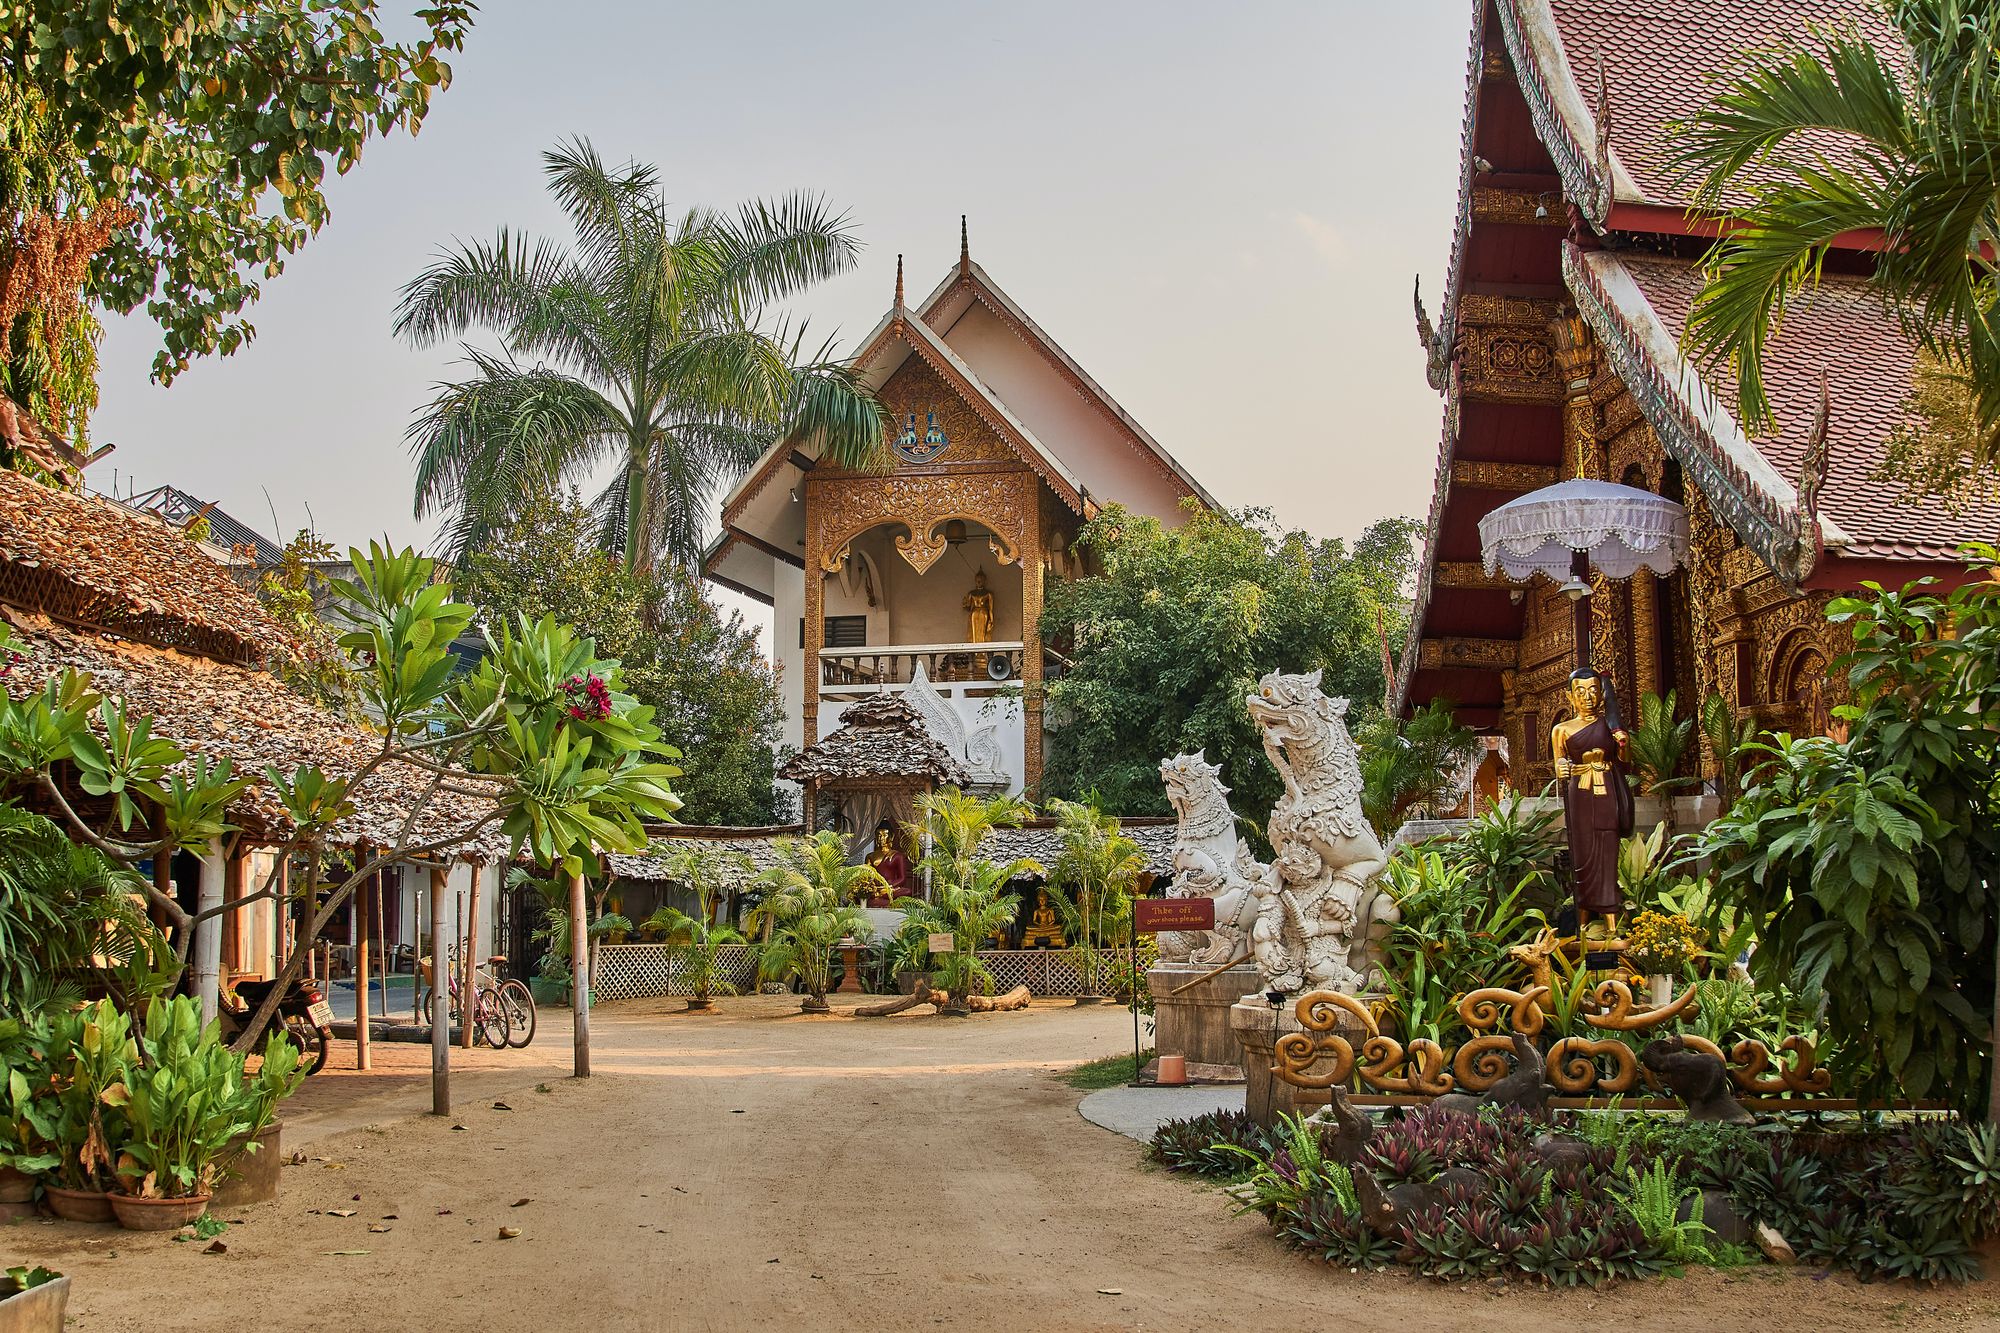 Temple and village road in Chiang Mai, Thailand